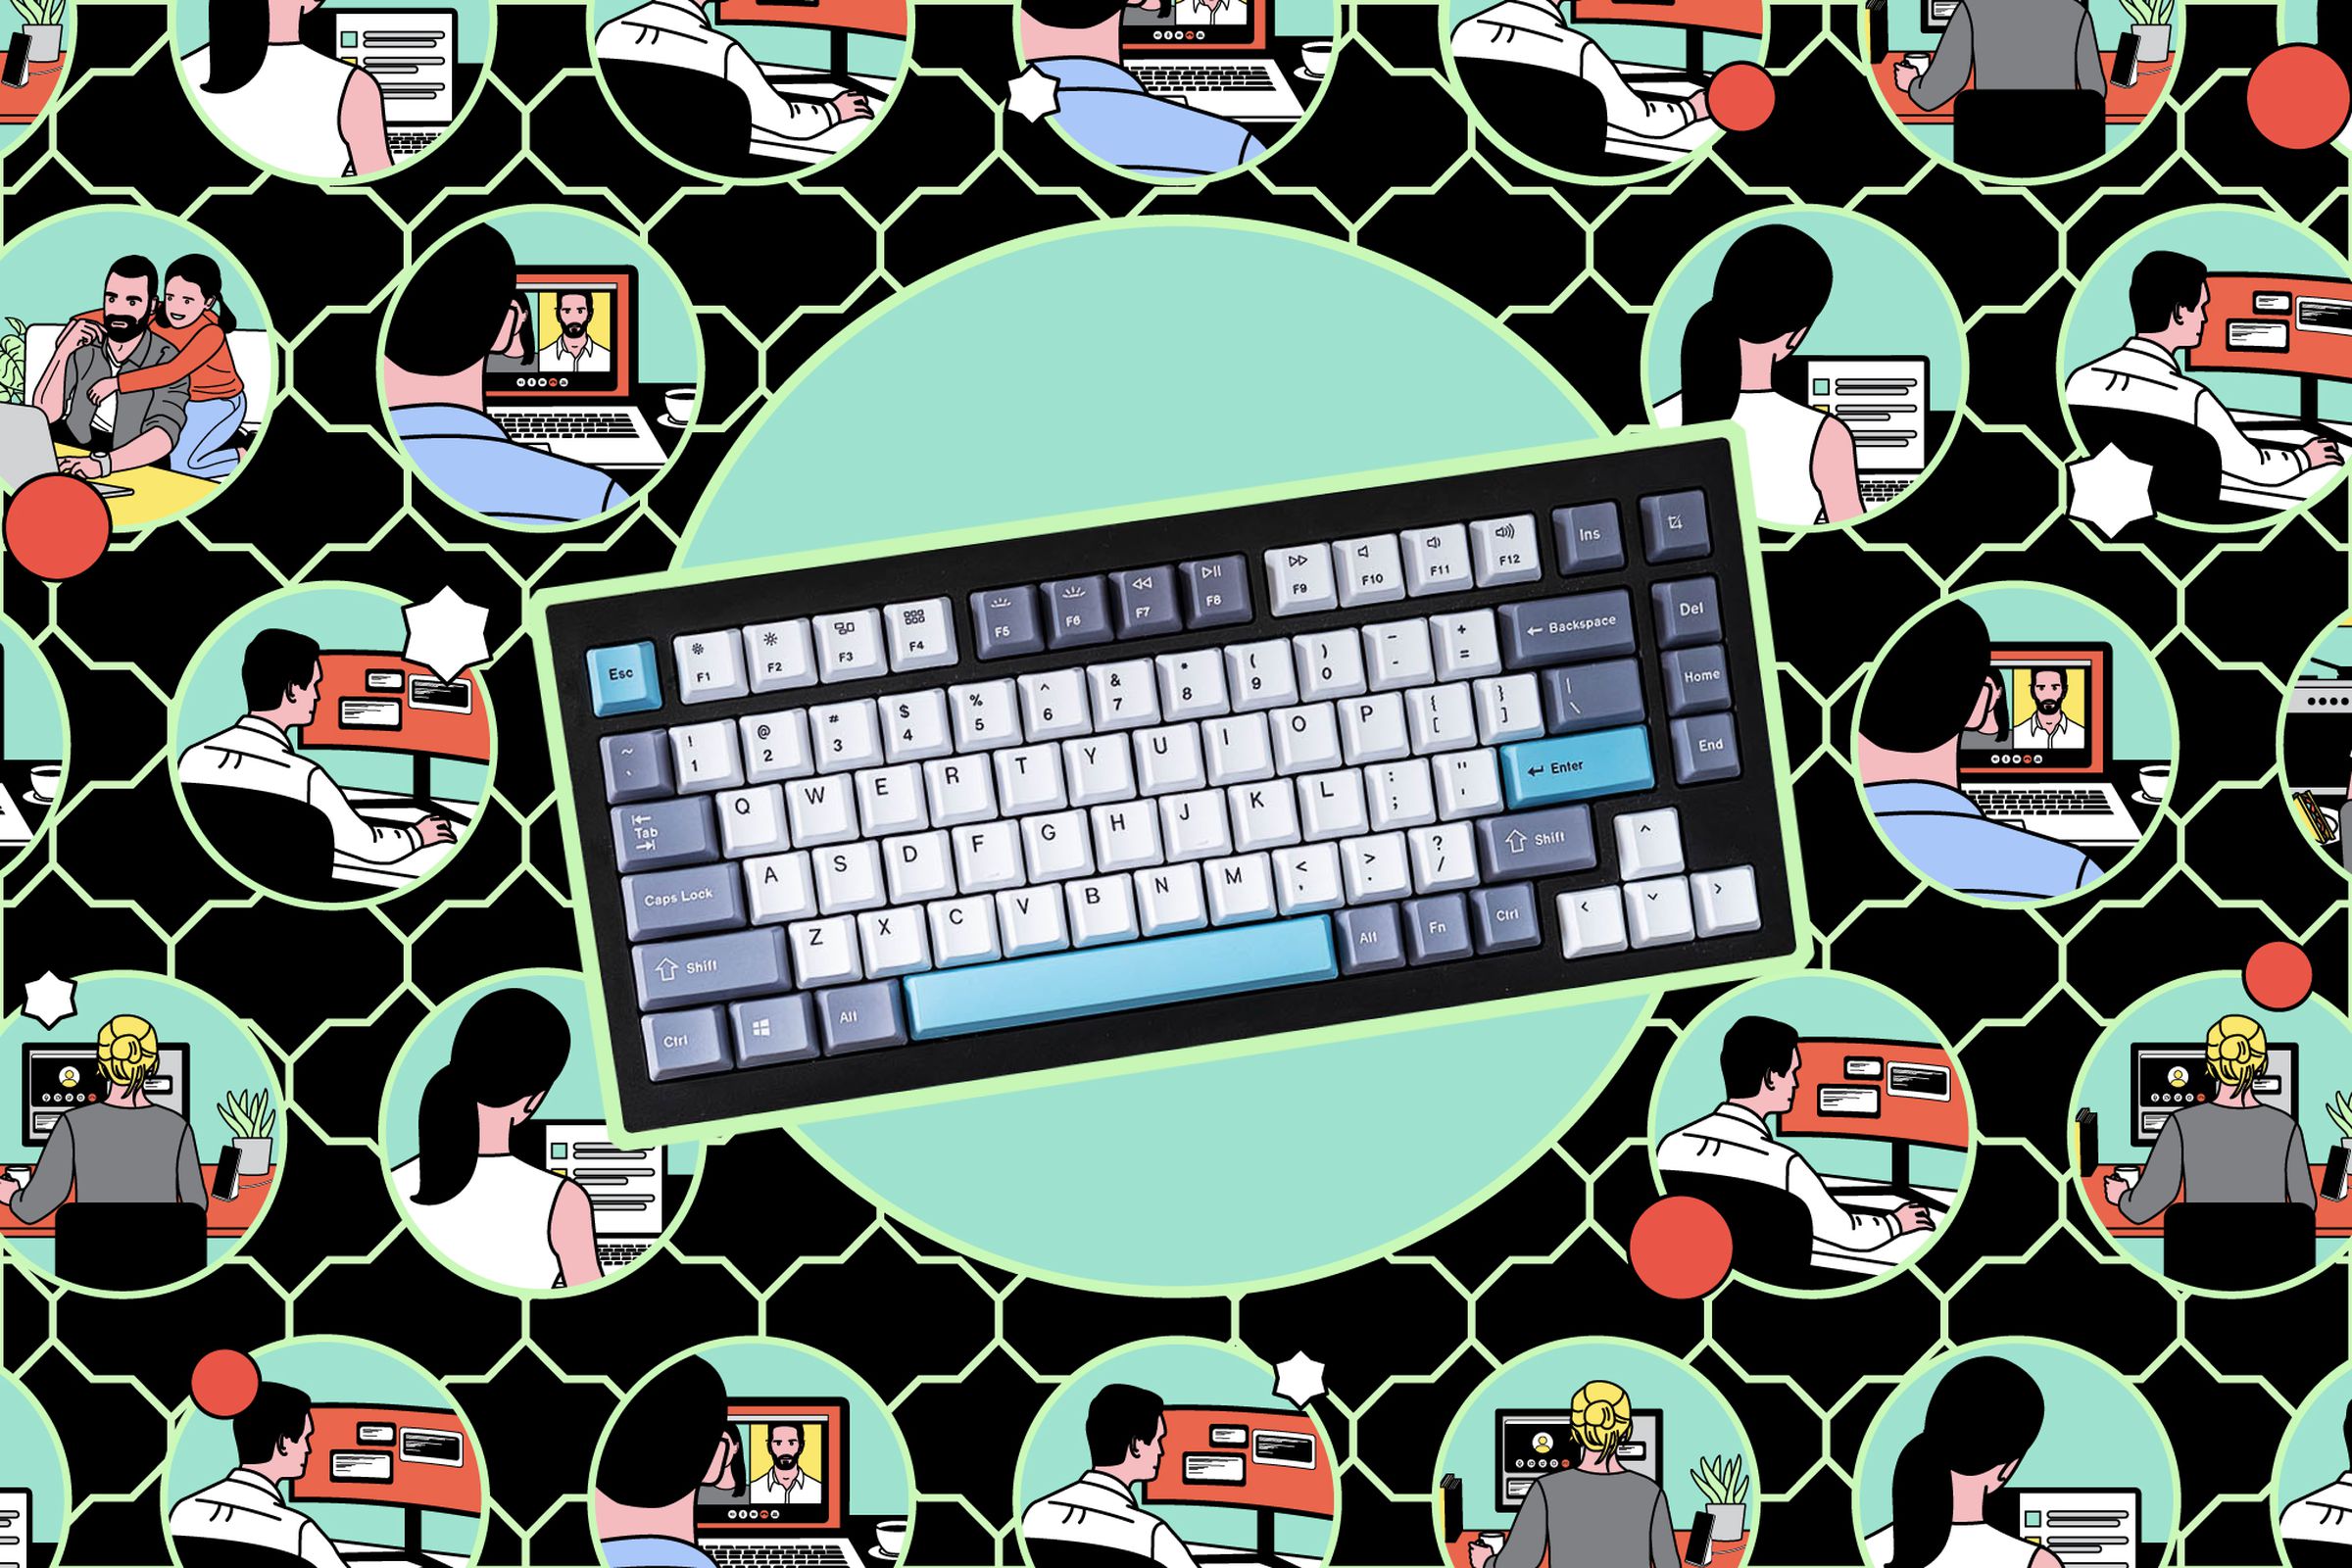 Illustration featuring a keyboard and various animated people typing on various computers